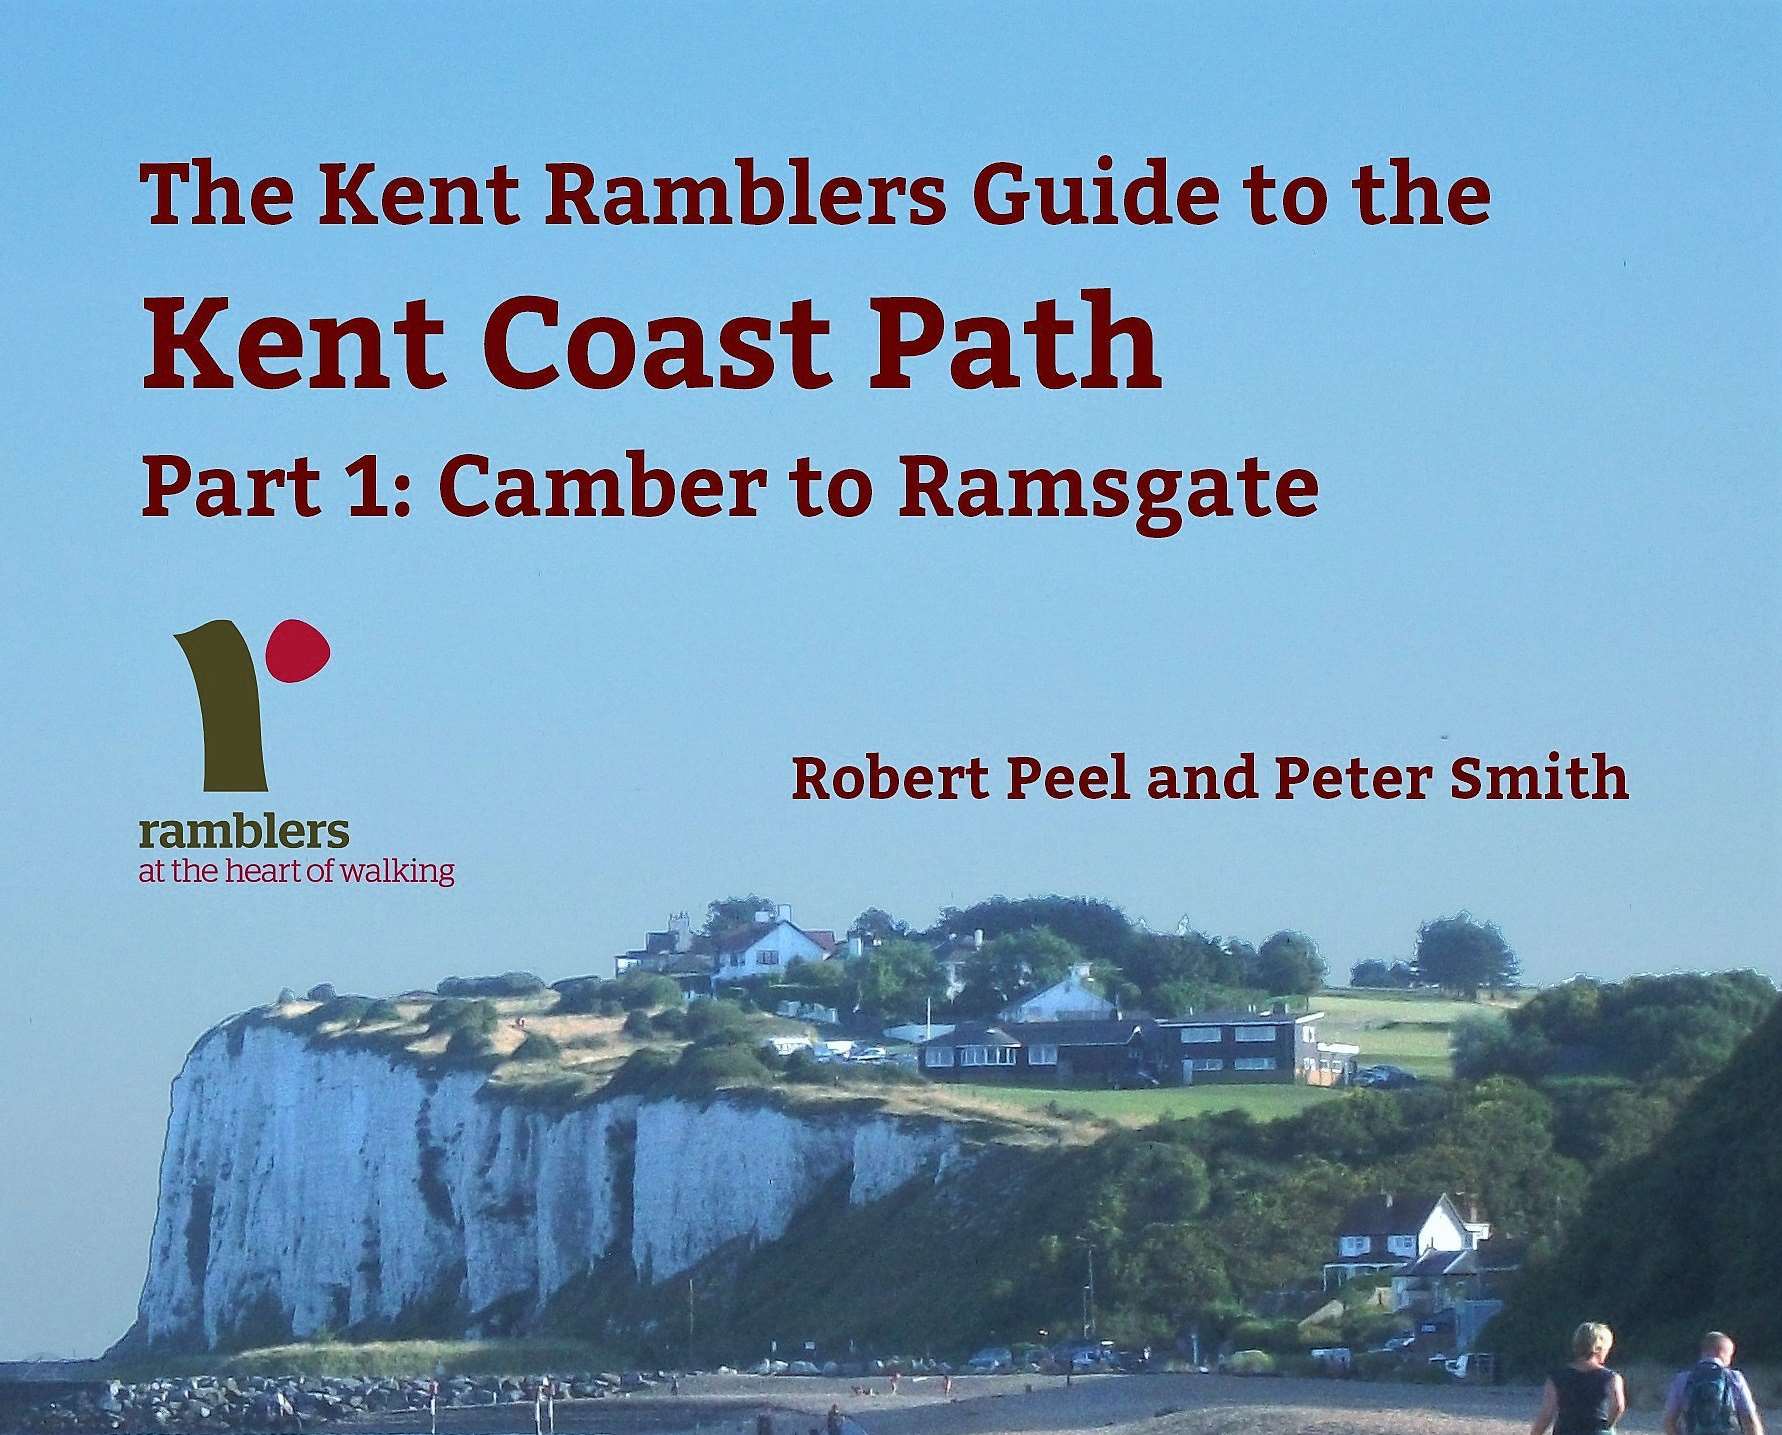 The Kent Ramblers Guide to the Kent Coast Path by Robert Peel and Peter Smith